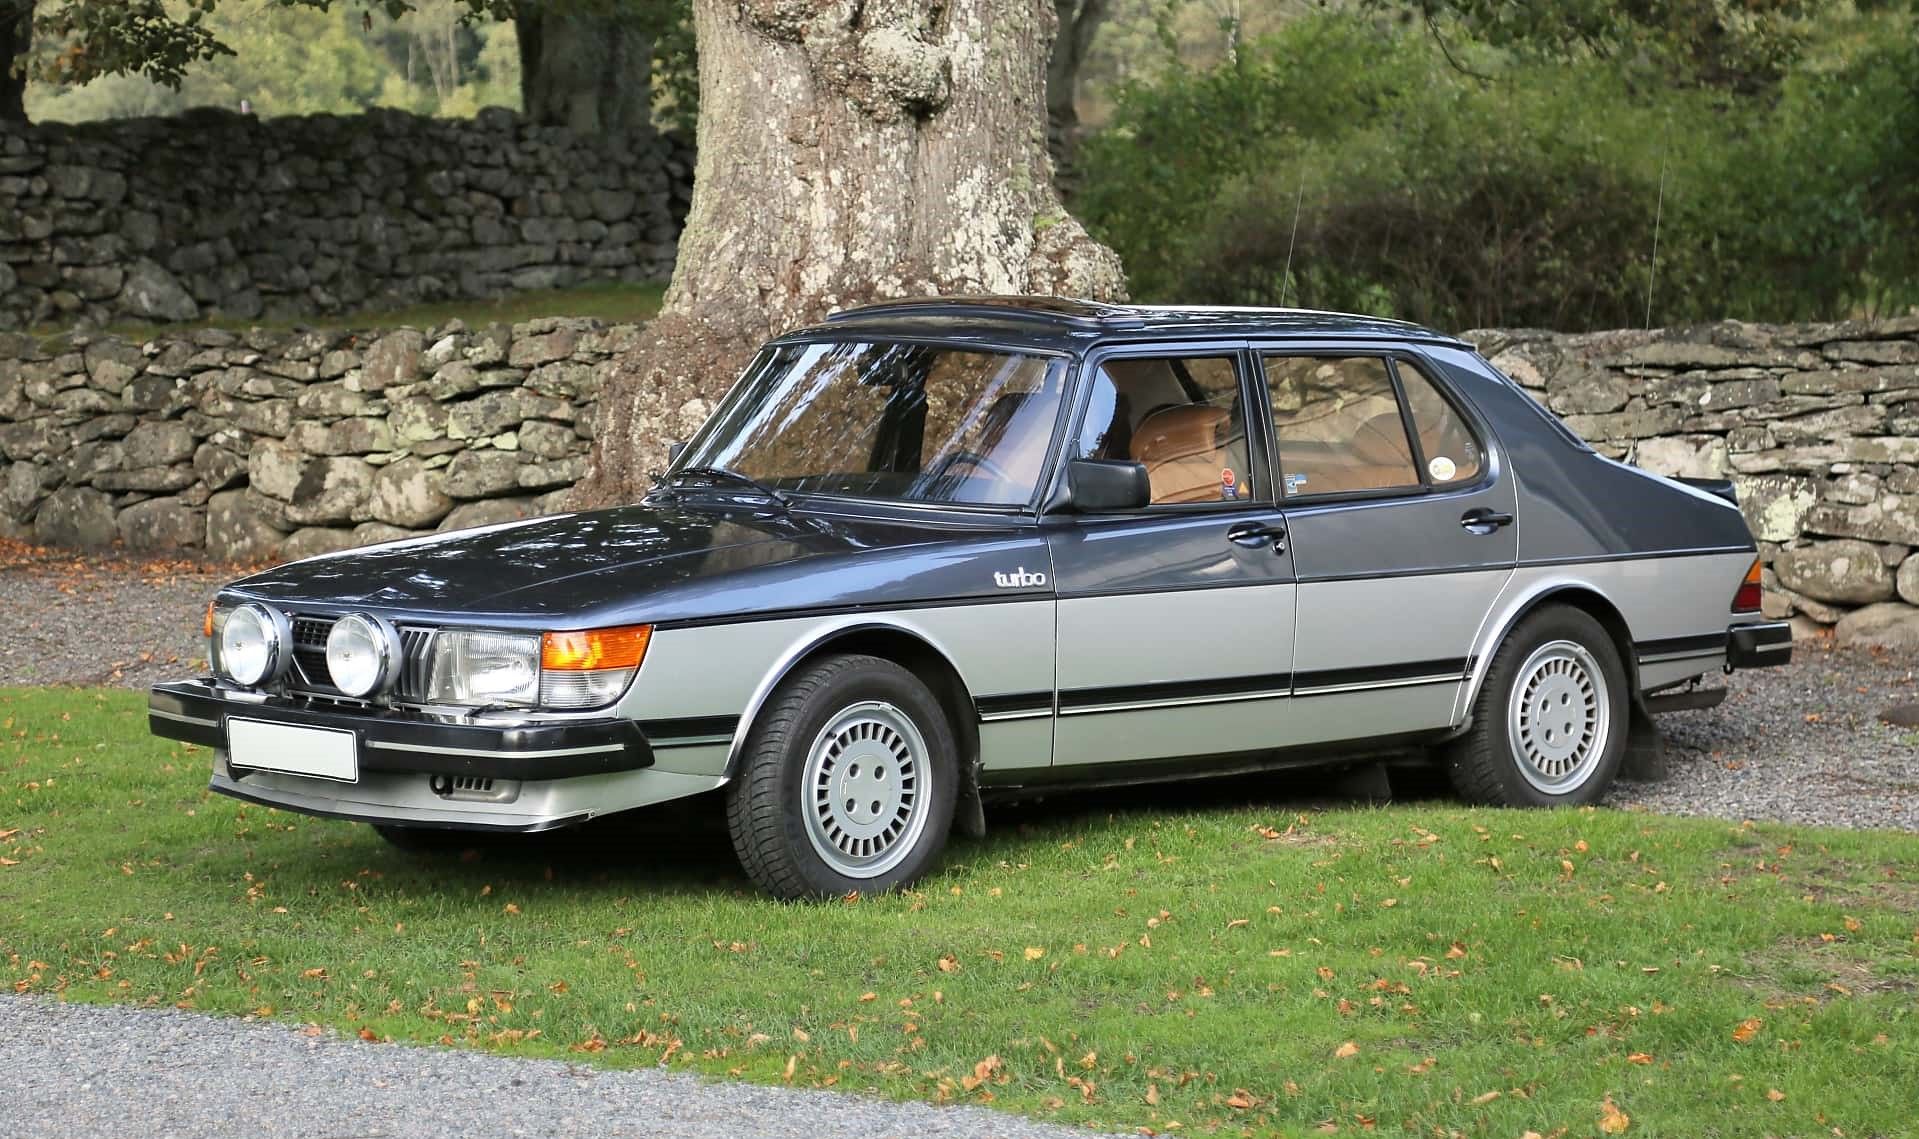 Saab 900 Turbo parked on the grass